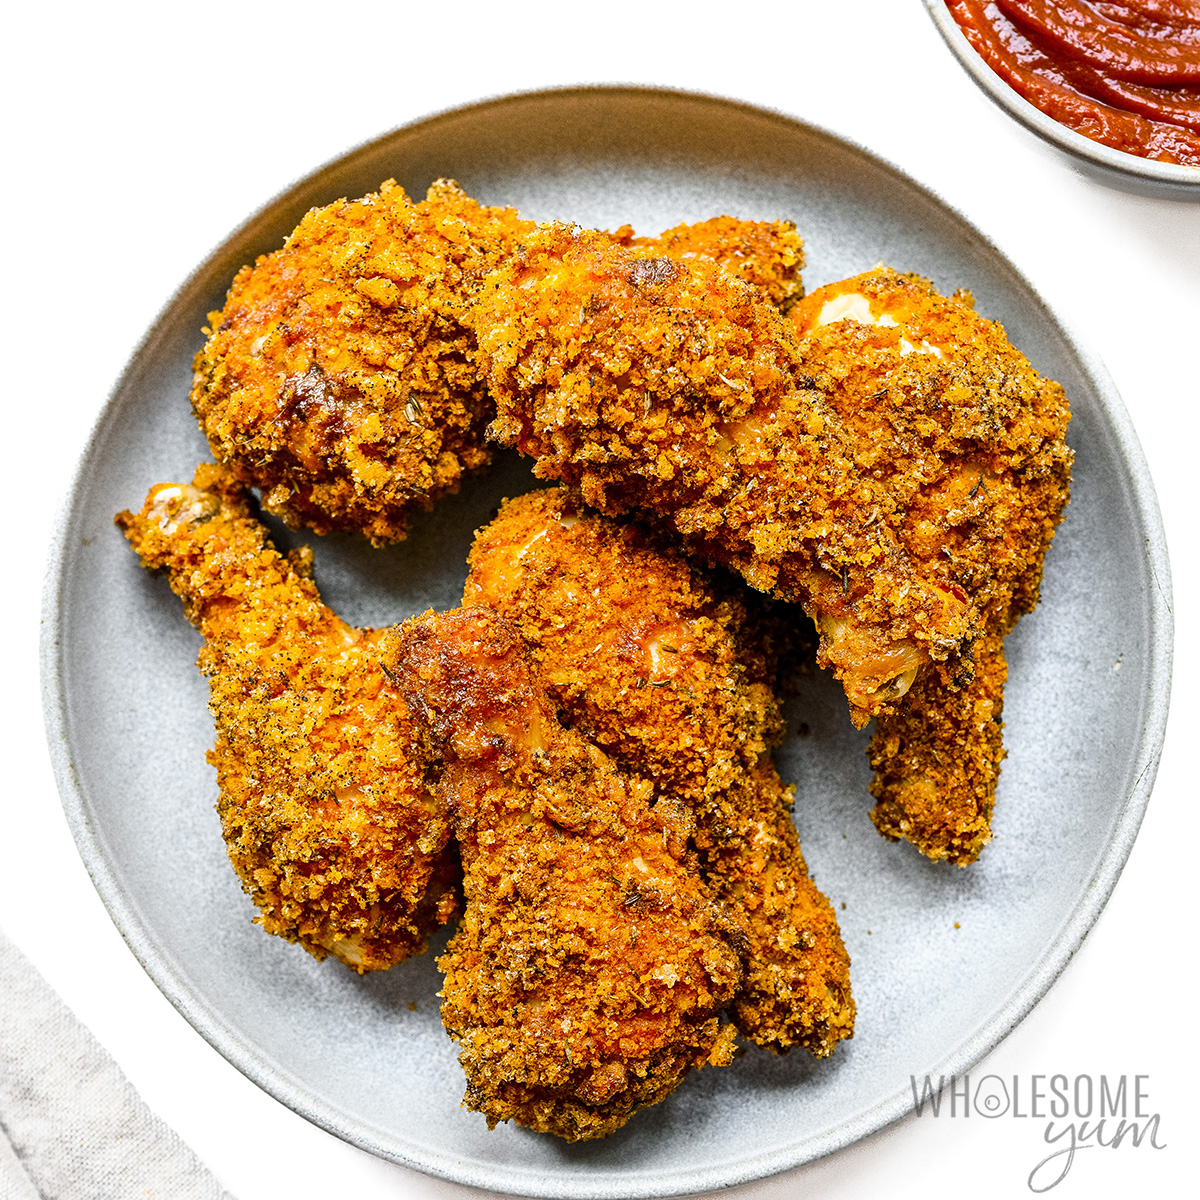 Keto fried chicken on a plate.